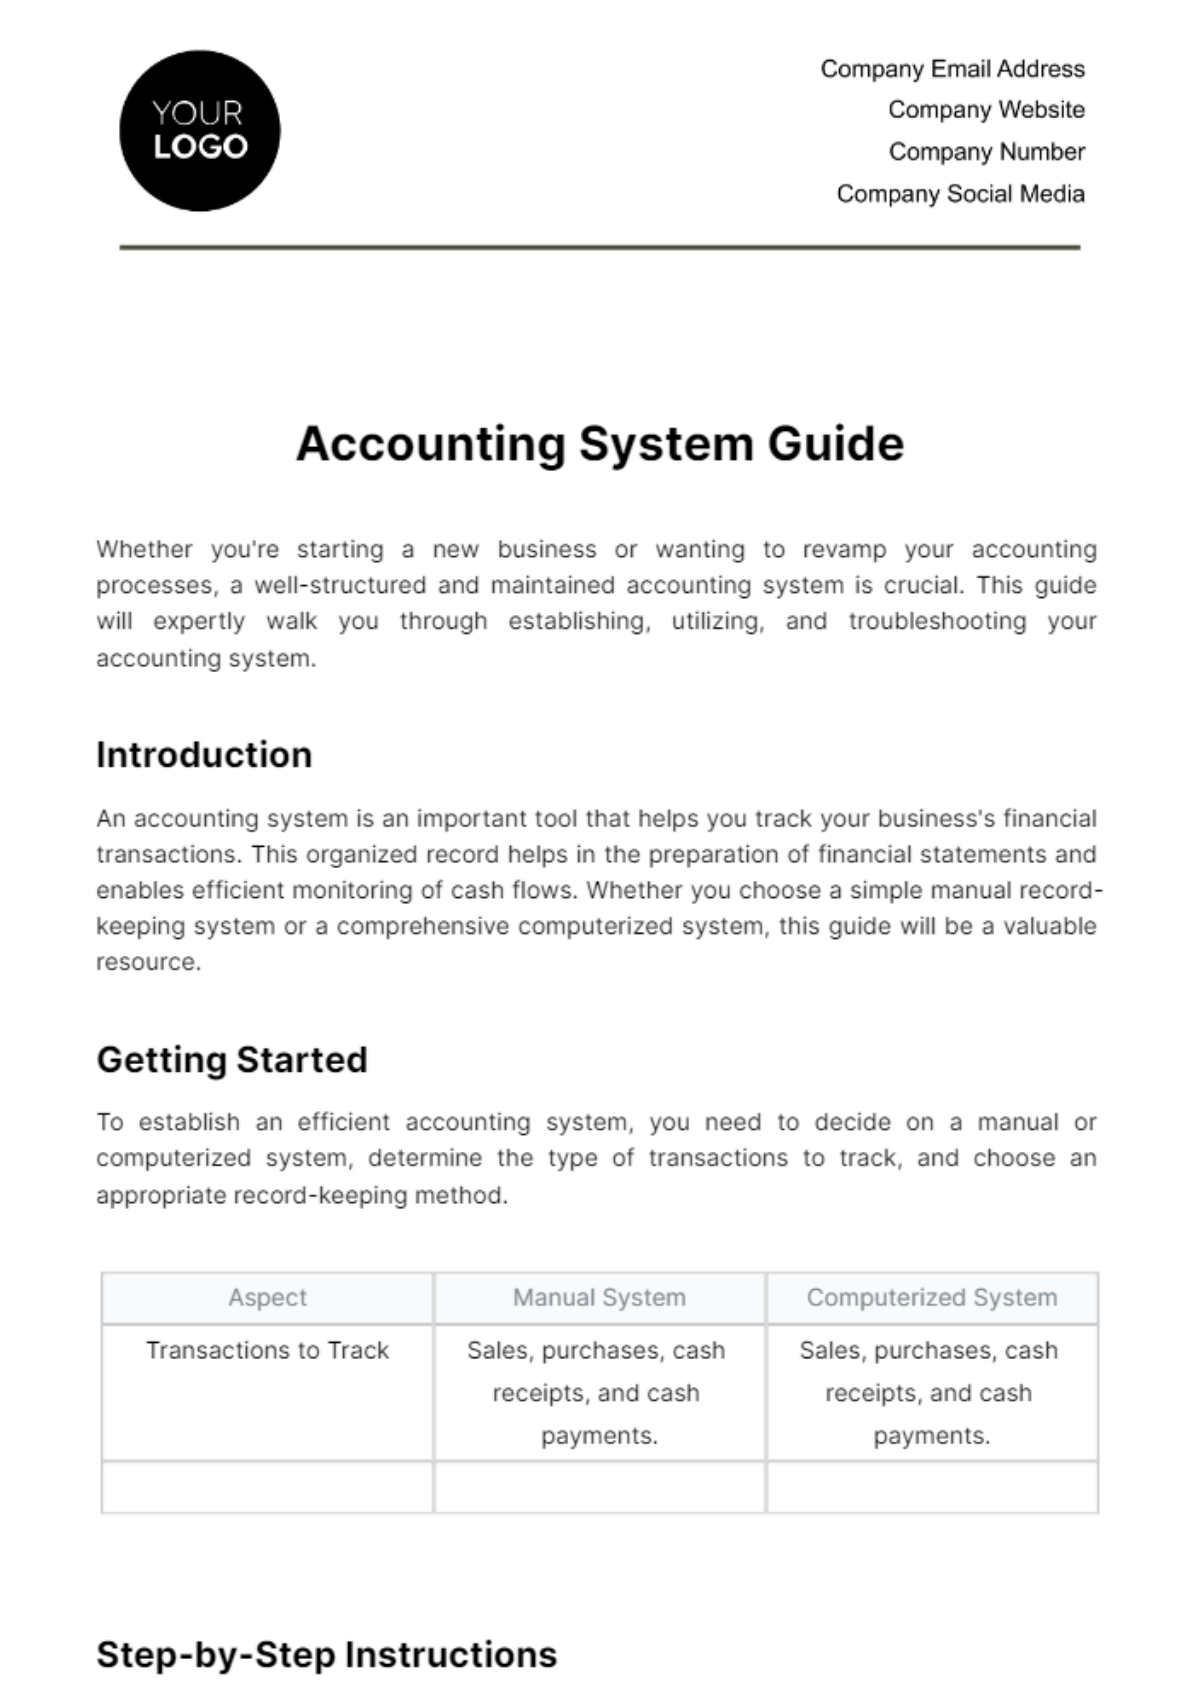 Accounting System Guide Template